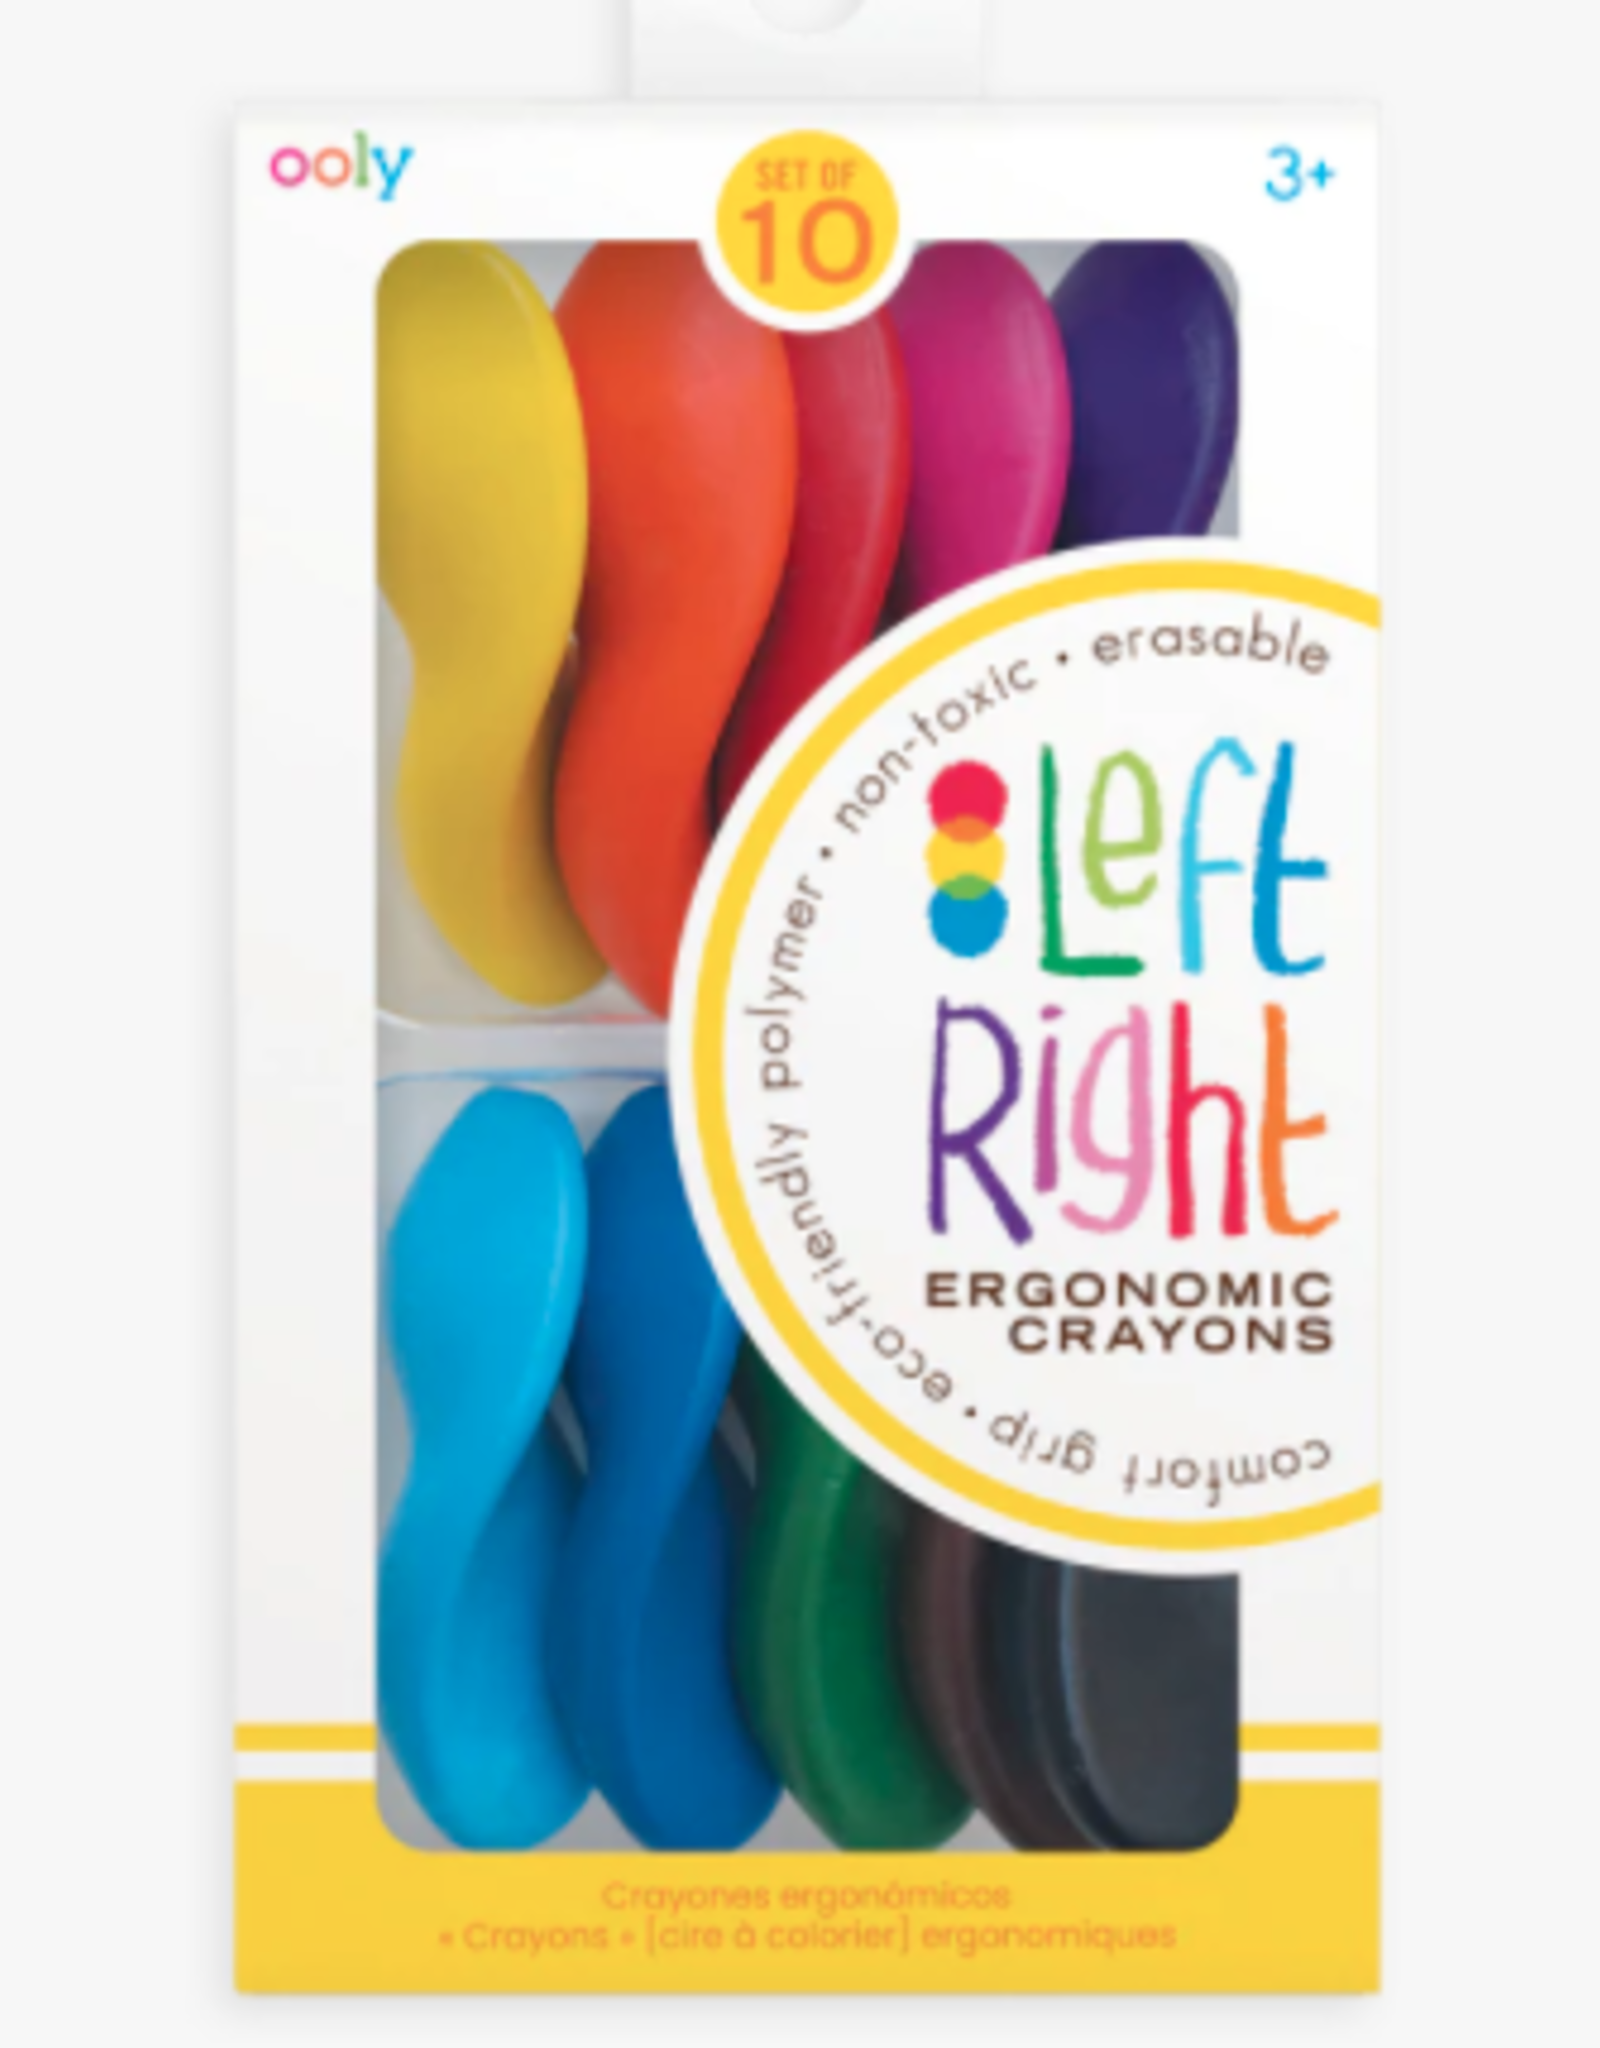 OOLY Left-Right Ergonomic Crayons